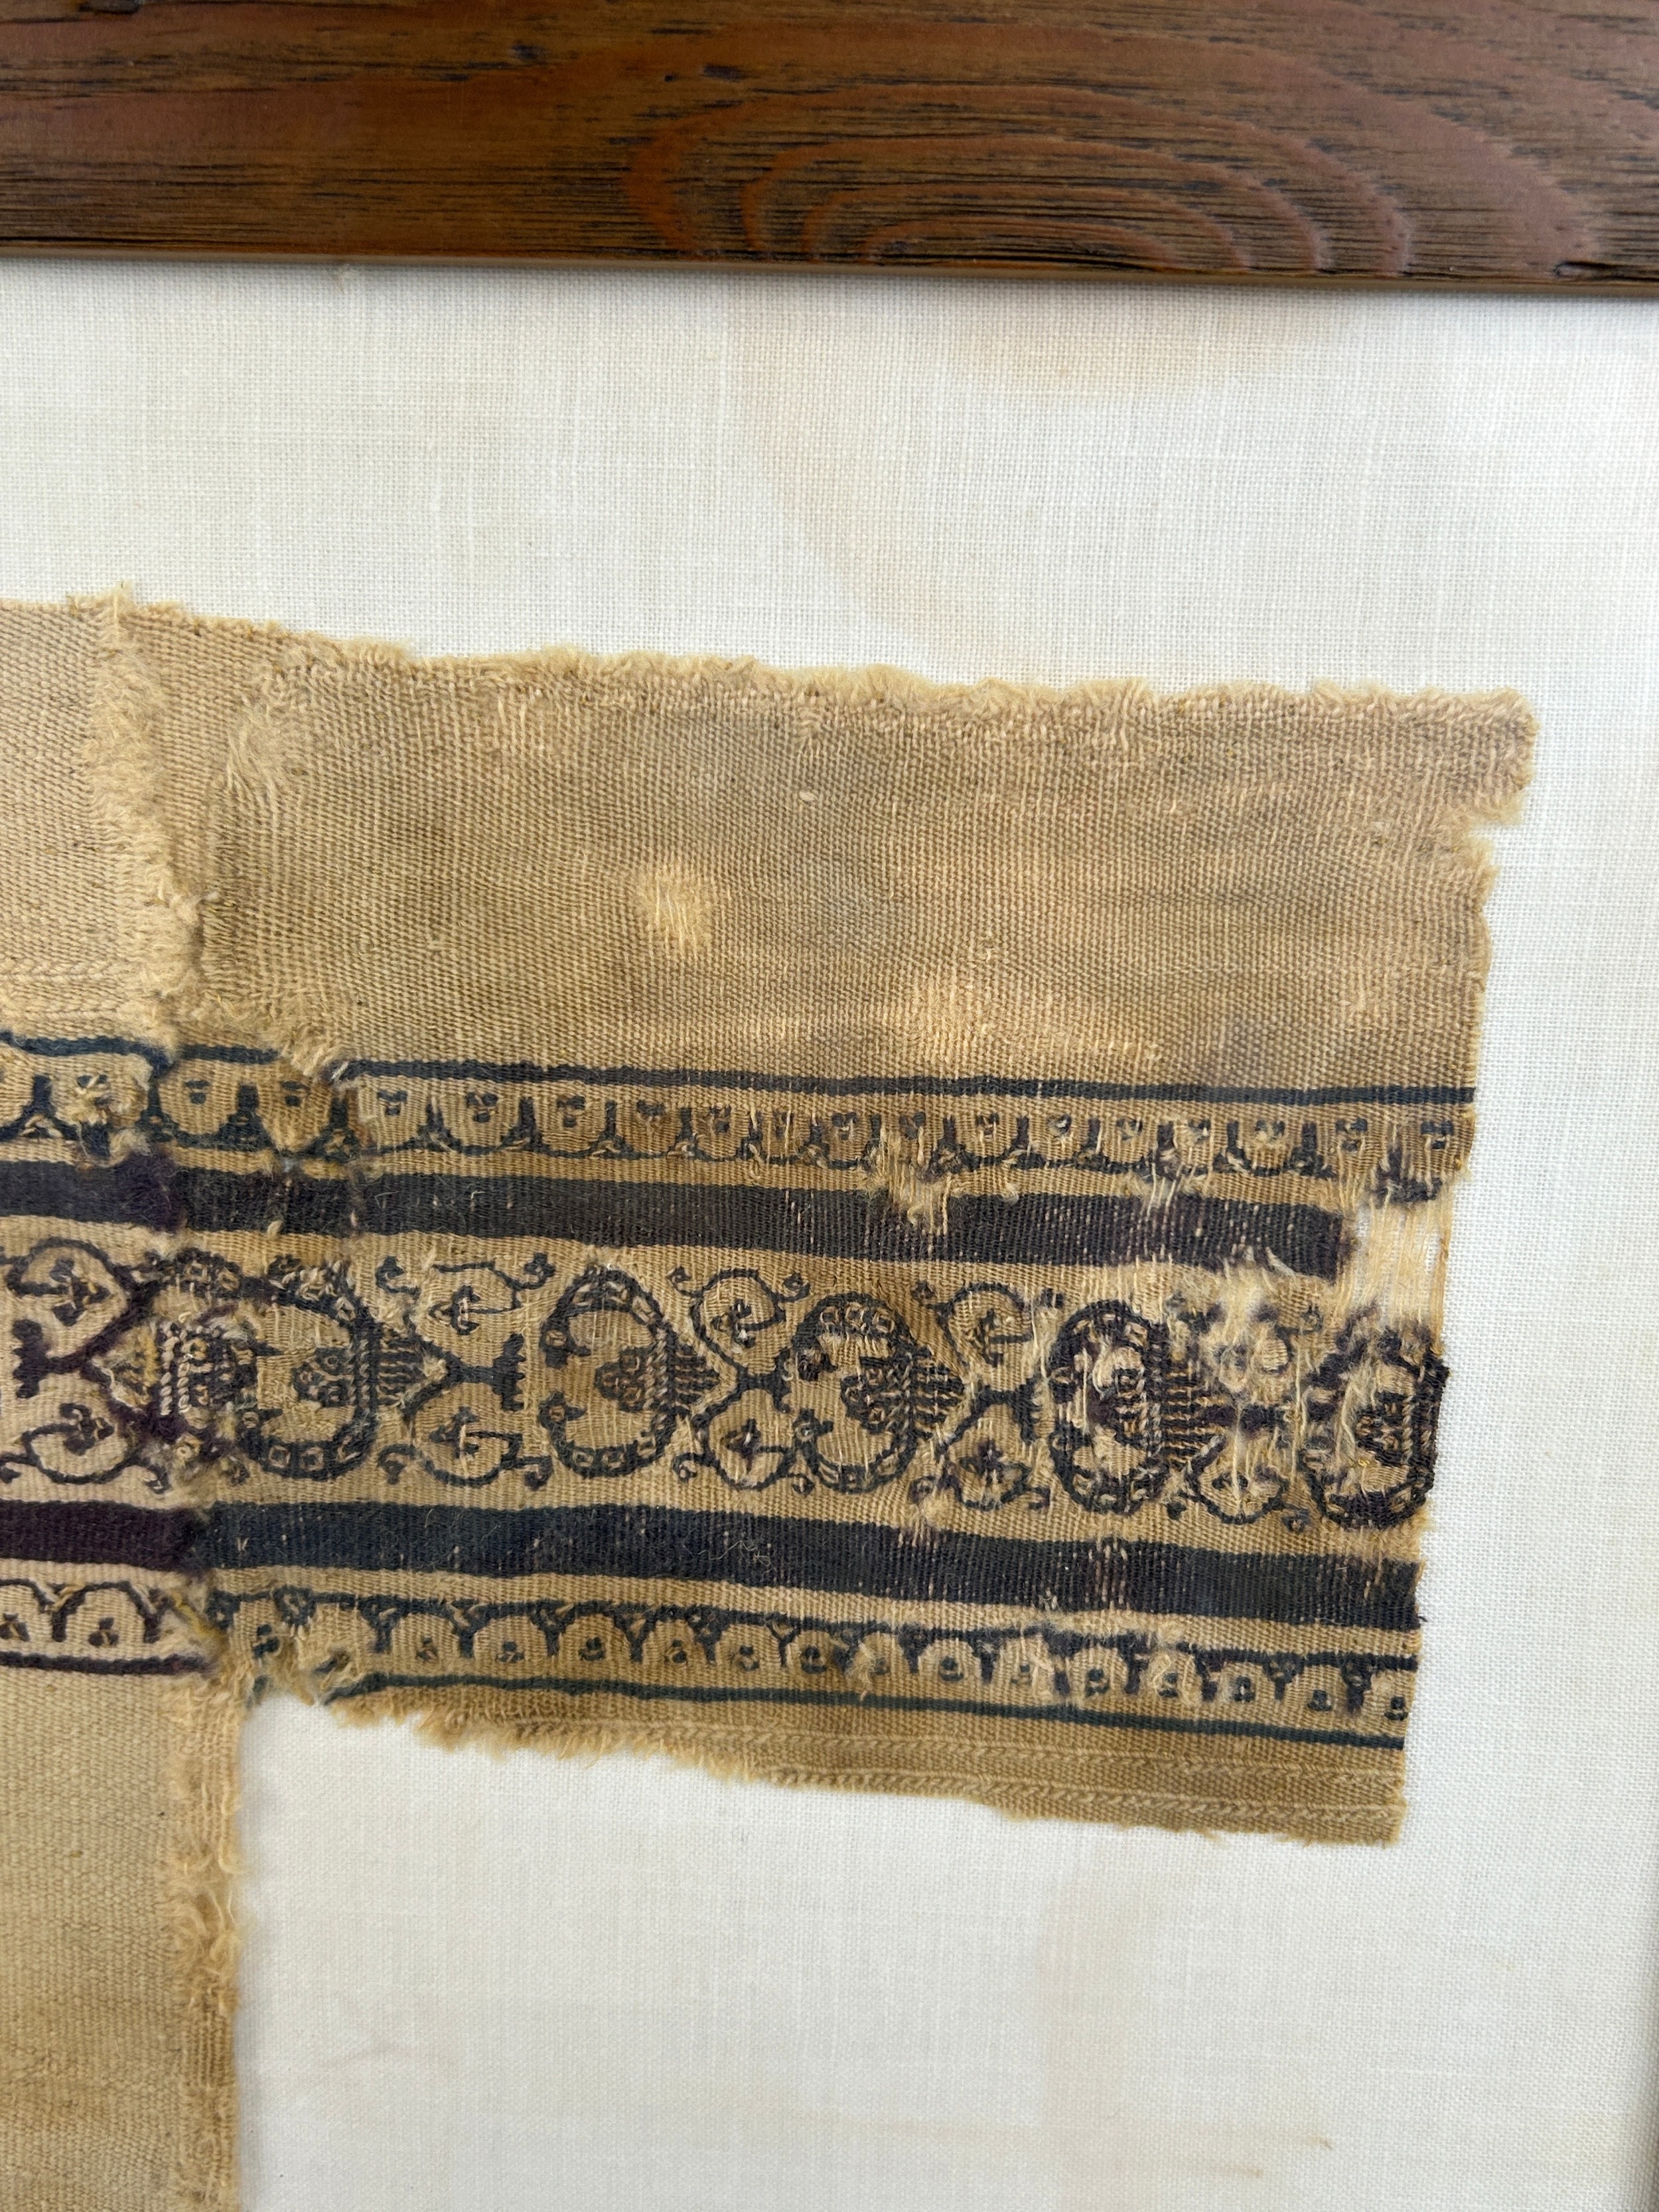 A COPTIC LINEN AND WOOL TEXTILE CIRCA 5TH-8TH CENTURY A.D. For similar see Bonhams Lot 330, ' - Image 3 of 10